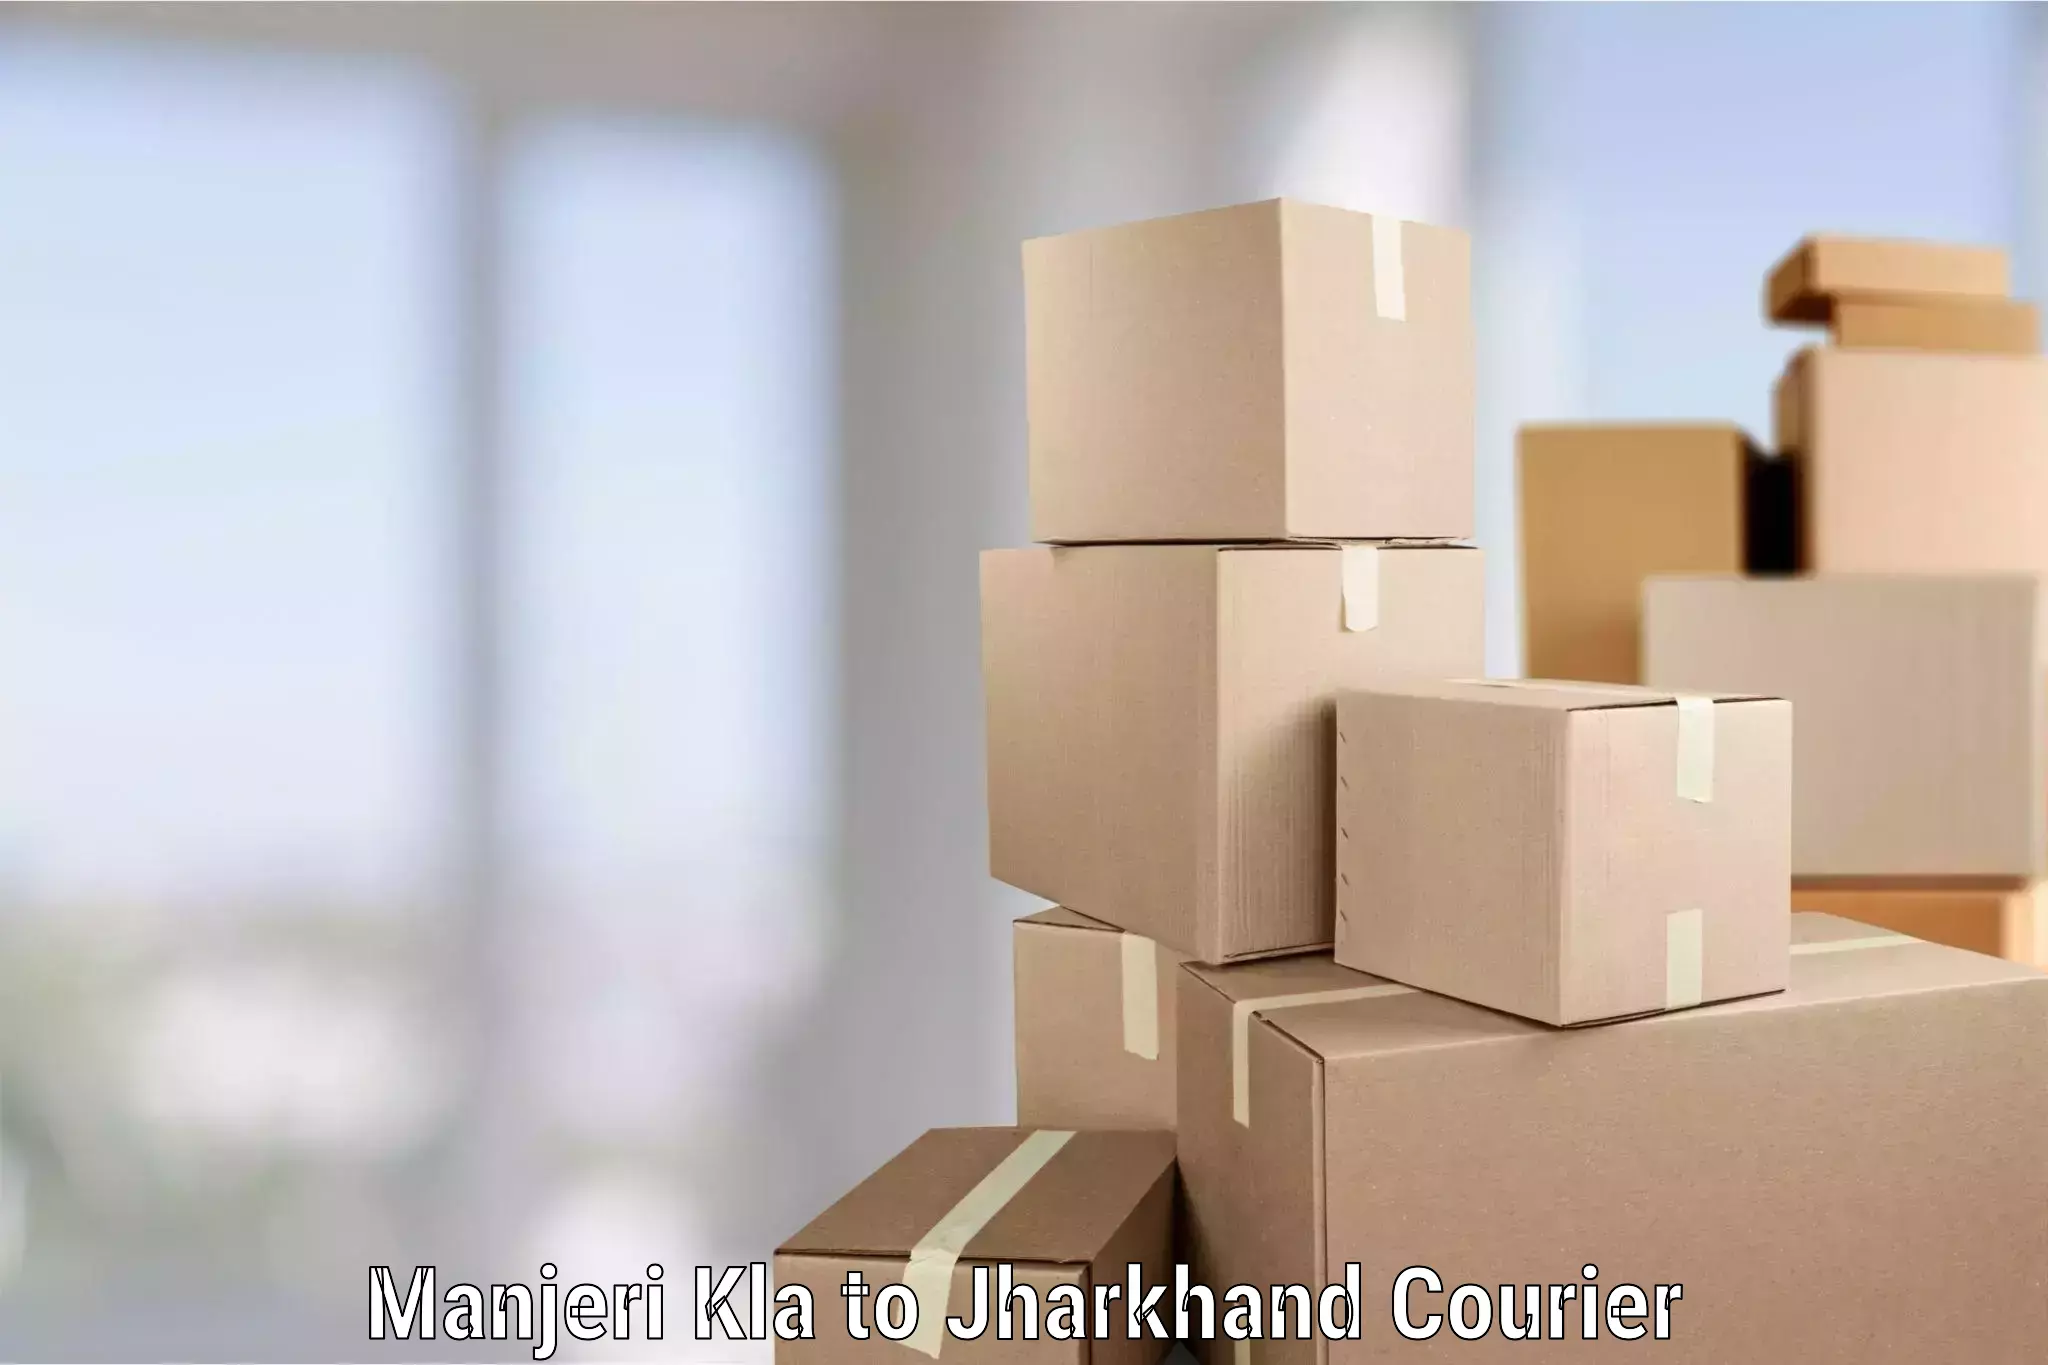 Trusted relocation services Manjeri Kla to Jharkhand